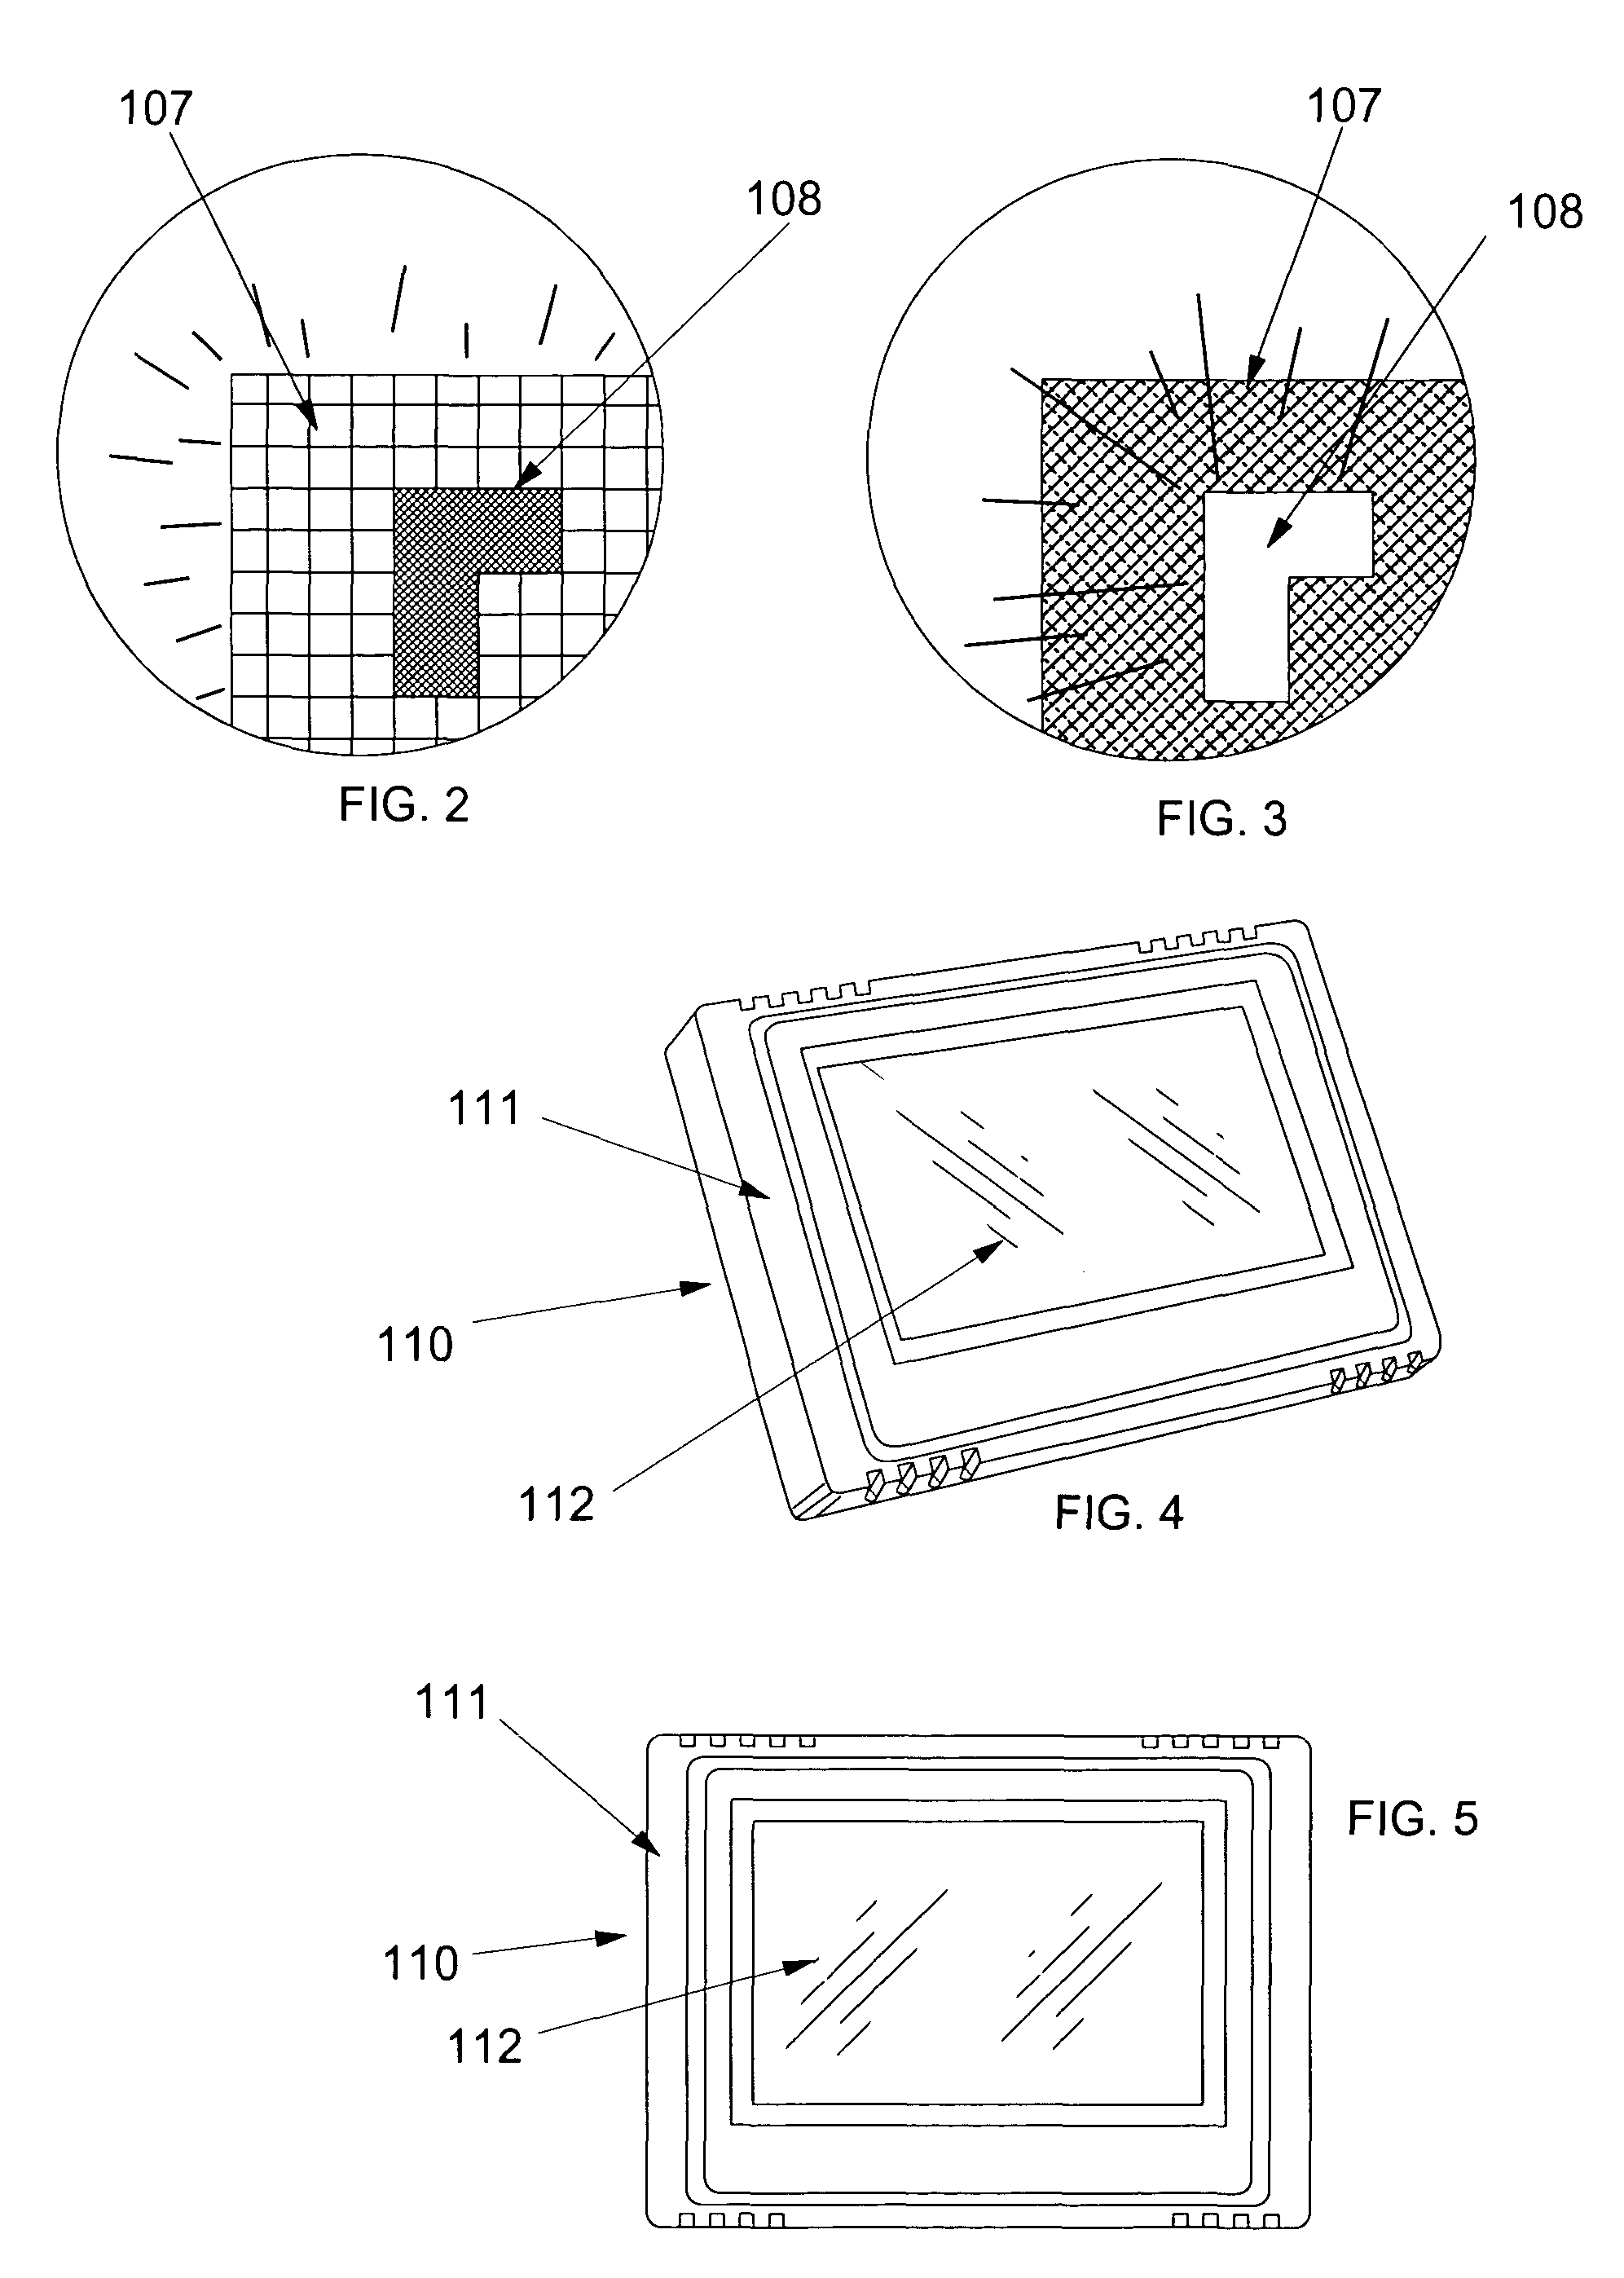 Programmable thermostat incorporating a liquid crystal display selectively presenting adaptable system menus including changeable interactive virtual buttons